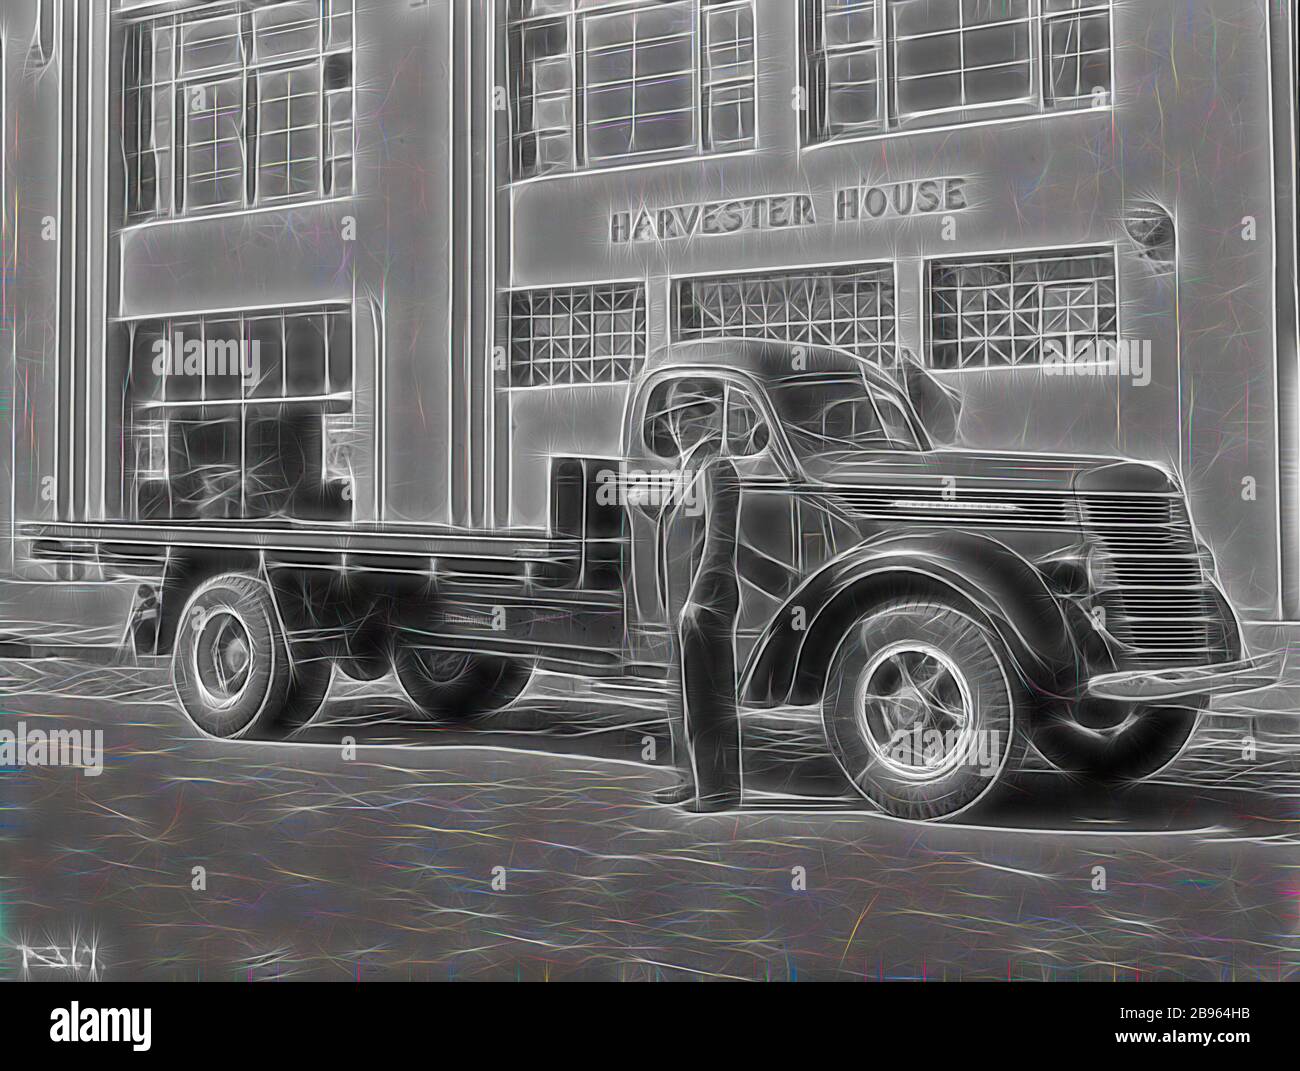 Negative - International Harvester, Keith Rigg & D40 Truck Outside Harvester House, City Road, South Melbourne, 1940, Part of a large collection of glass plate and film negatives, transparencies, photo albums, product catalogues, videos, motion picture films, company journals, advertisements and newspaper cuttings relating to the operations of the International Harvester Company and its subsidiaries in Australia. The International Harvester Company of America was formed in 1902 by the merger of five leading, Reimagined by Gibon, design of warm cheerful glowing of brightness and light rays radi Stock Photo